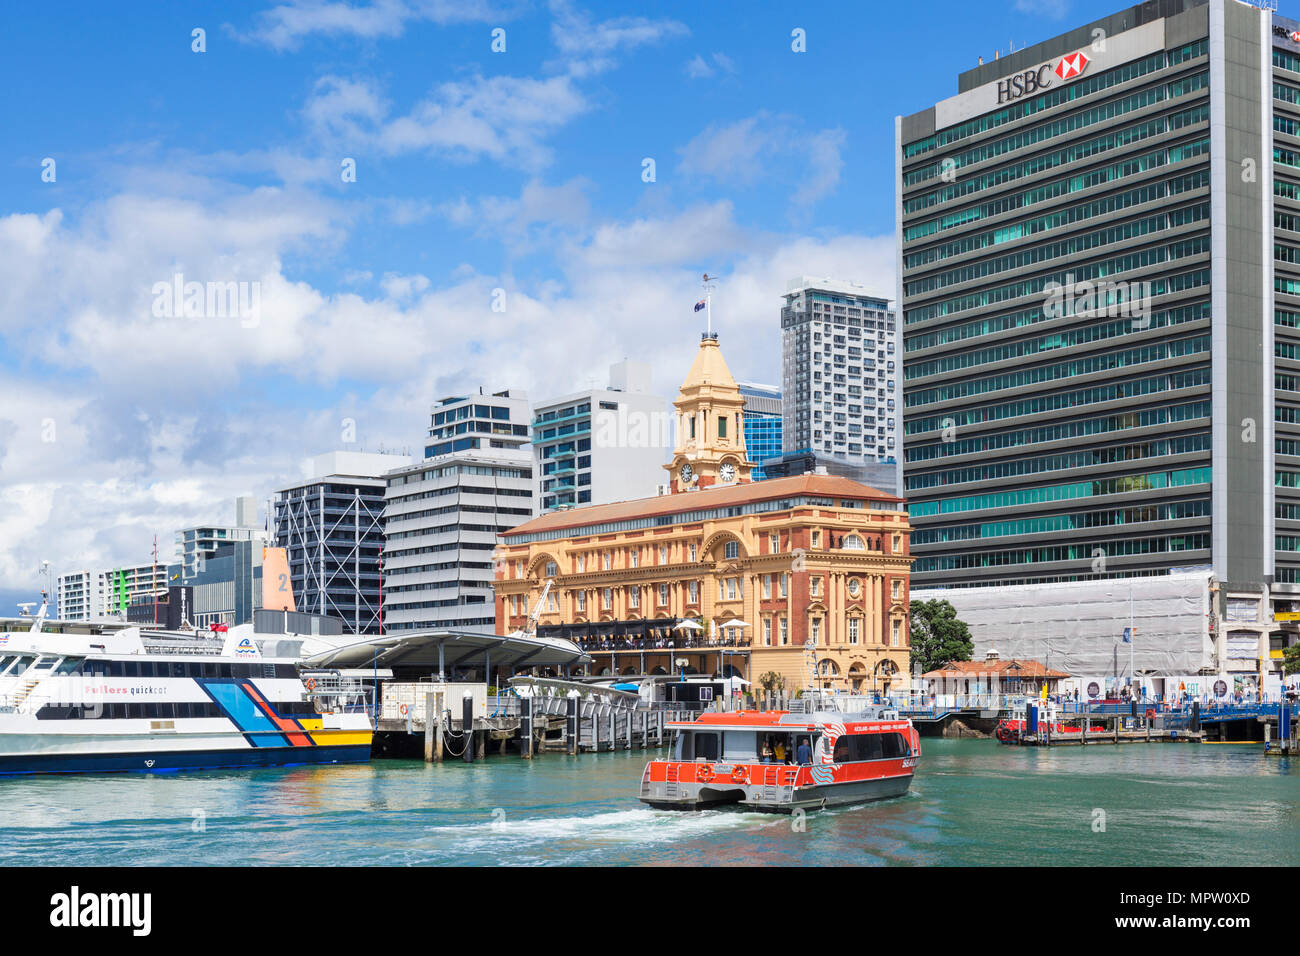 new zealand auckland new zealand north island the Ferry building Quay street Auckland waterfront with arriving ferry new zealand north island Stock Photo